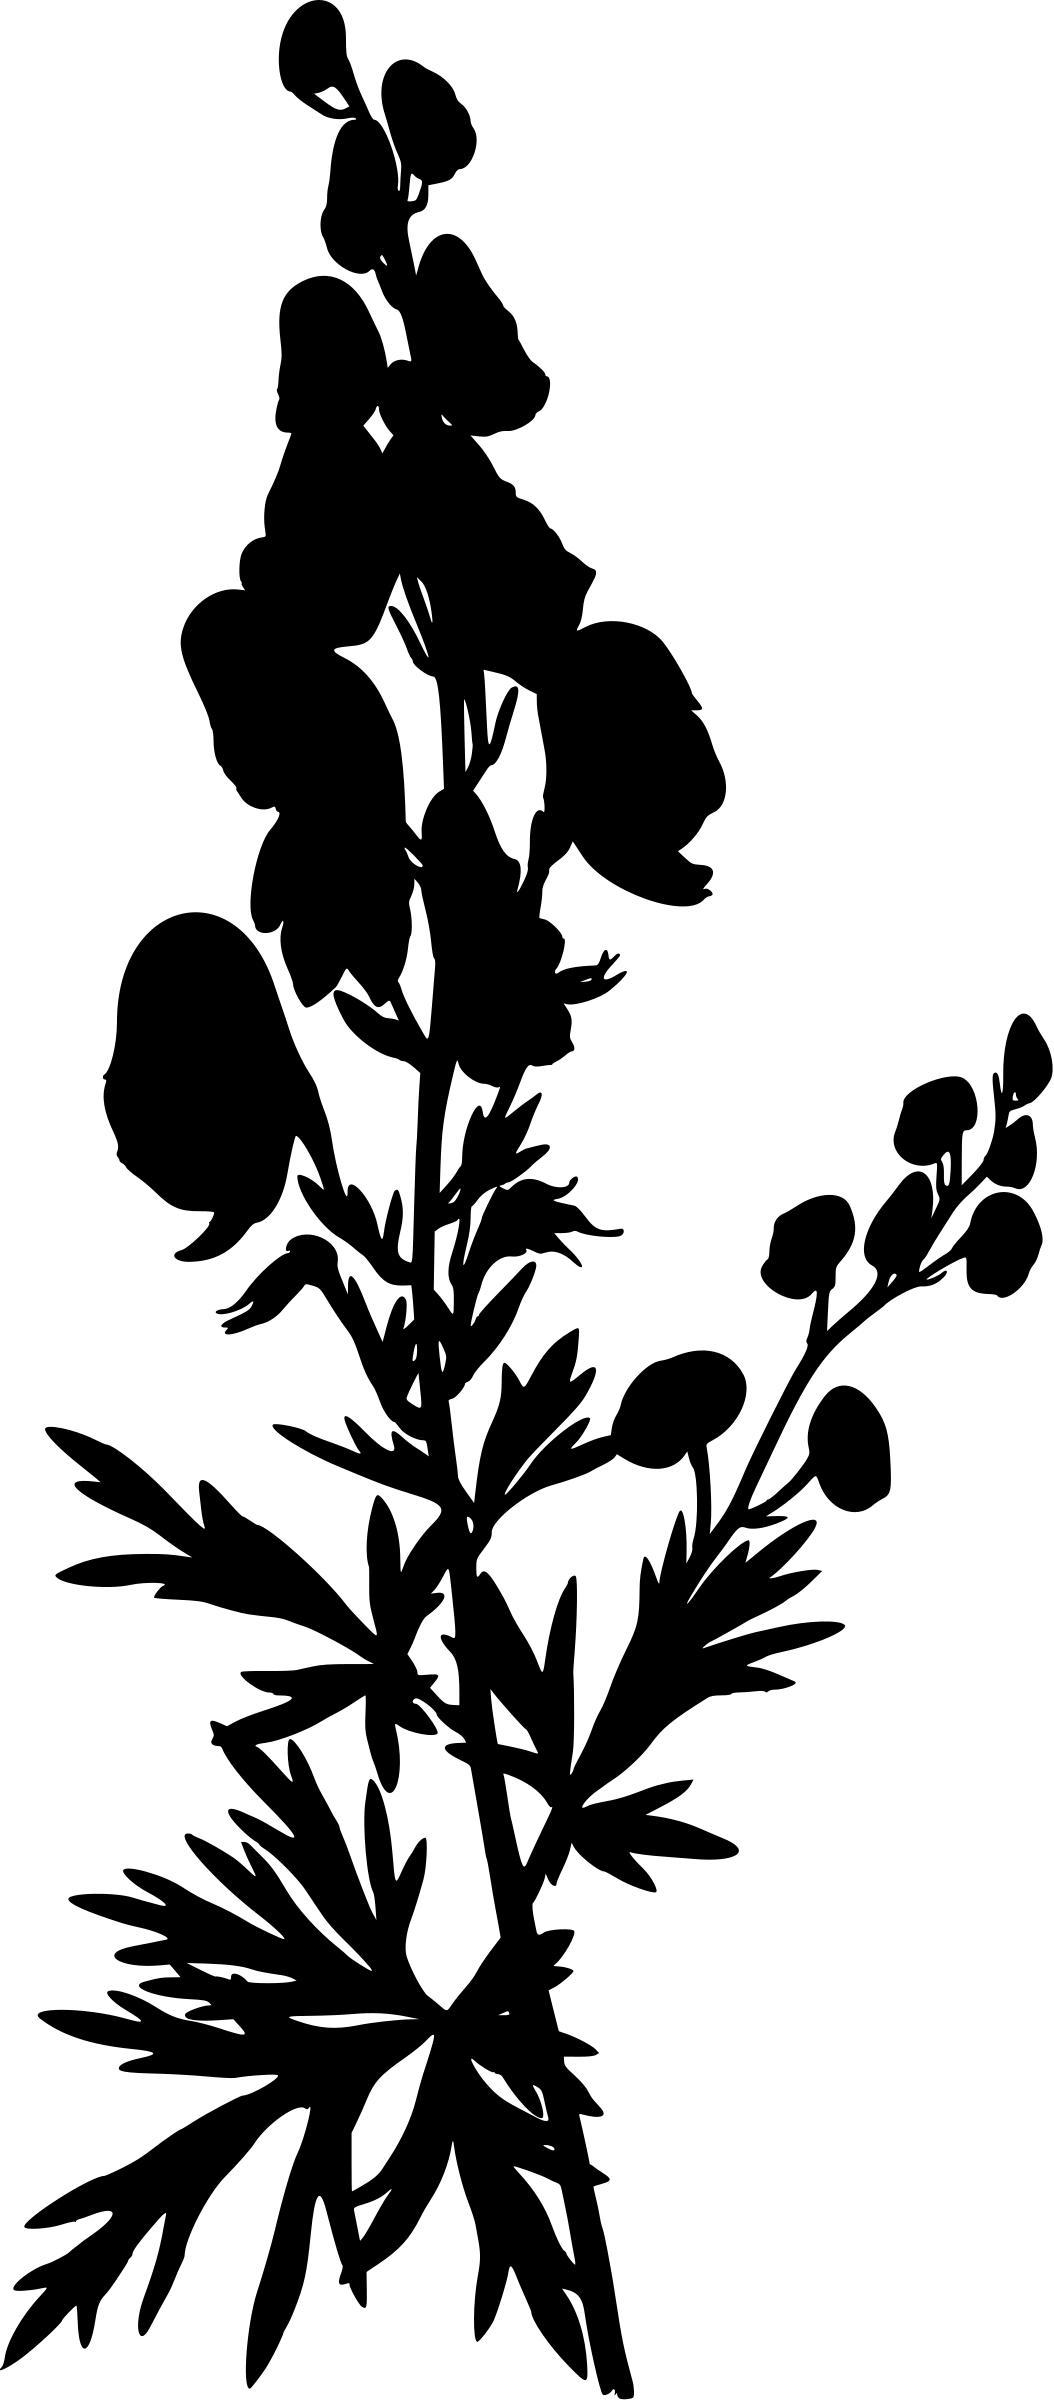 Wolfsbane (silhouette) png transparent